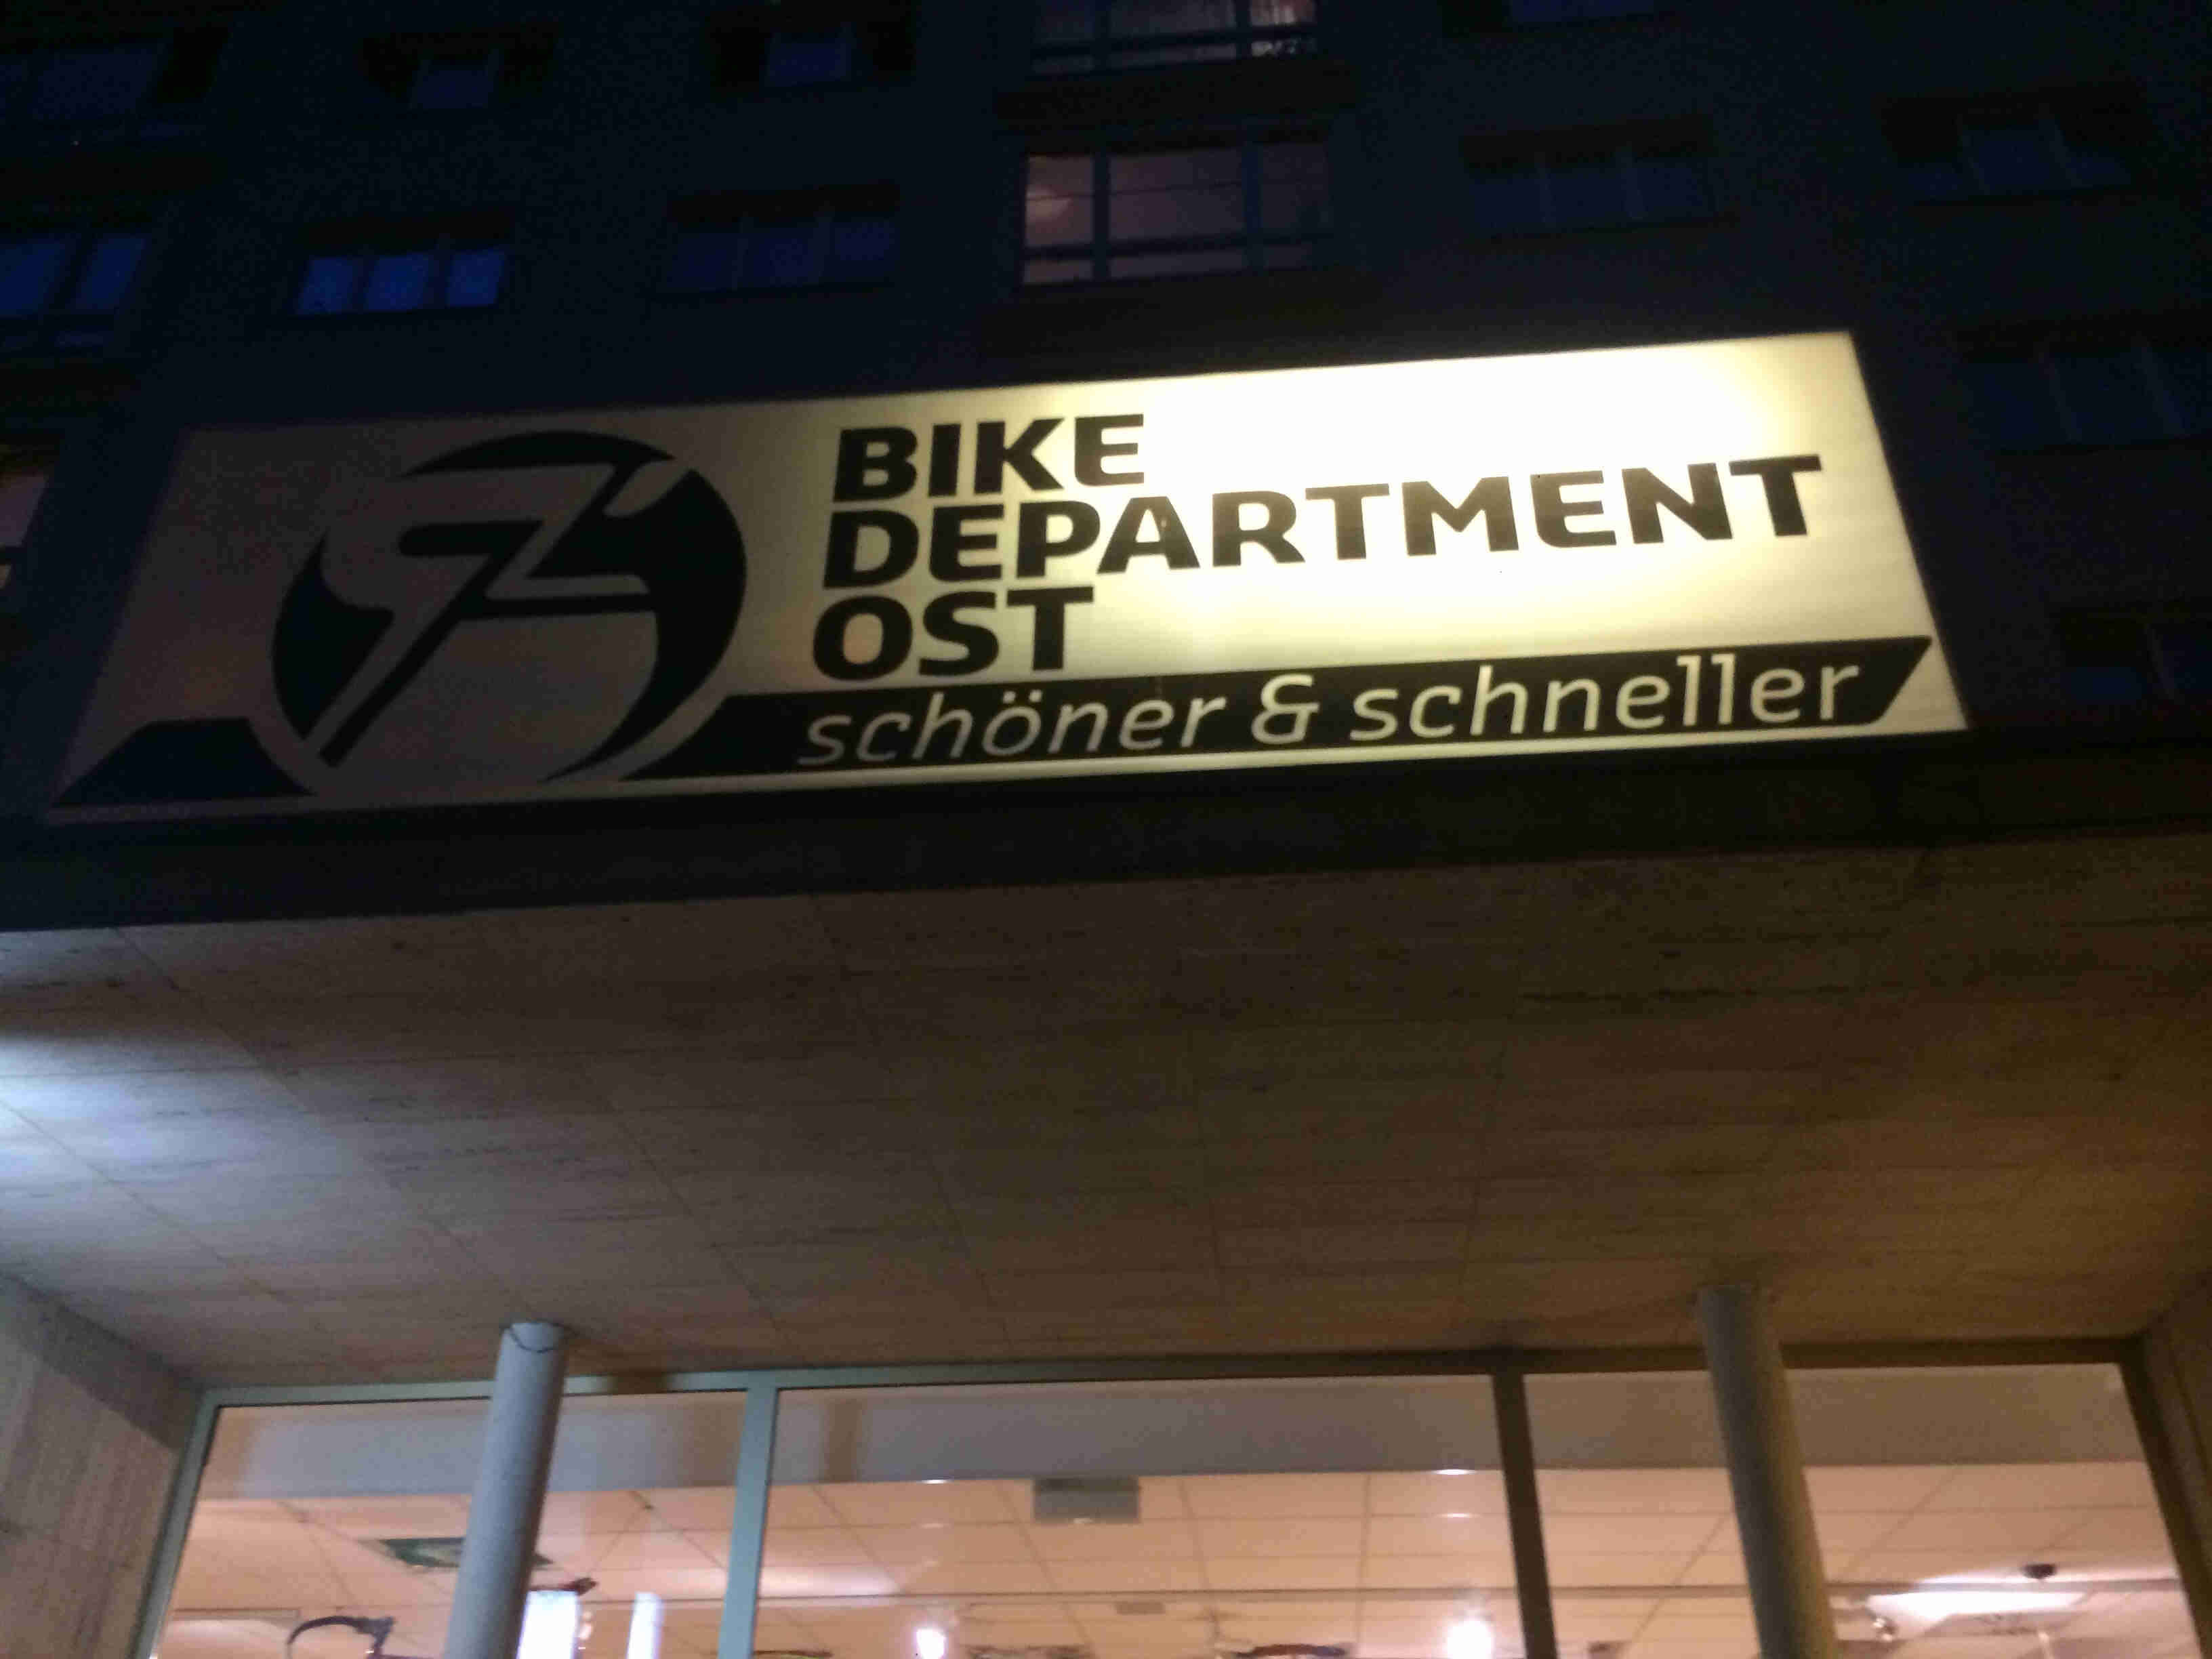 A lit up sign showing, Bike Department OST - schoner & schneller, above the glass front doors, on a building at night